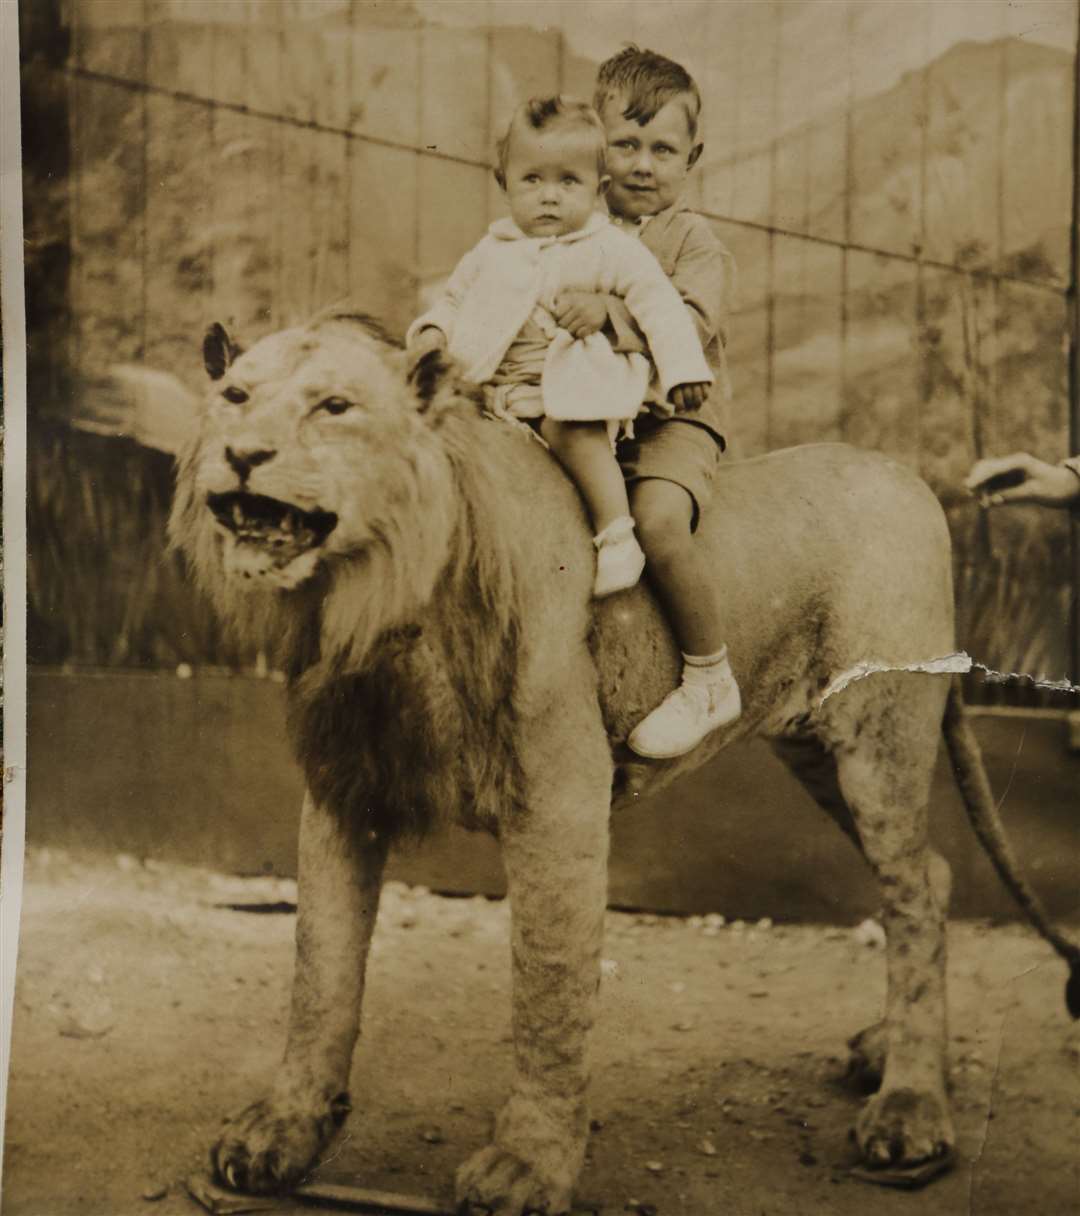 Brothers Gordon and Alec Crouch pose on the lion in 1936